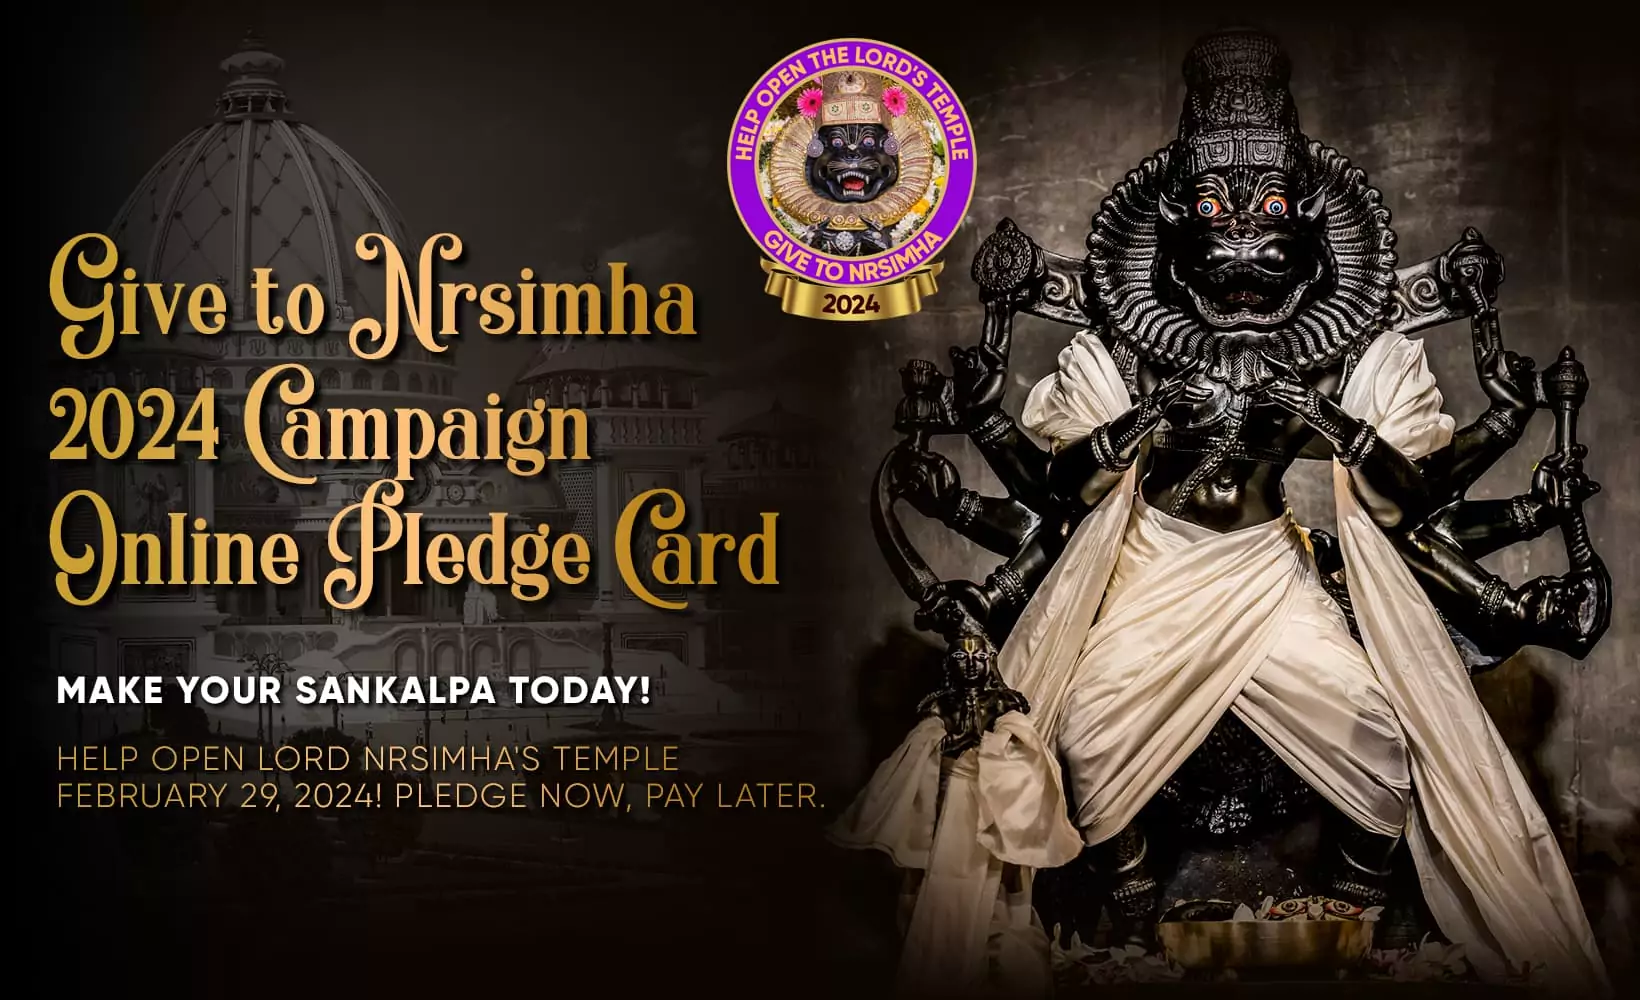 TOVP Give to Nrsimha 2024 Campaign Online Pledge Card